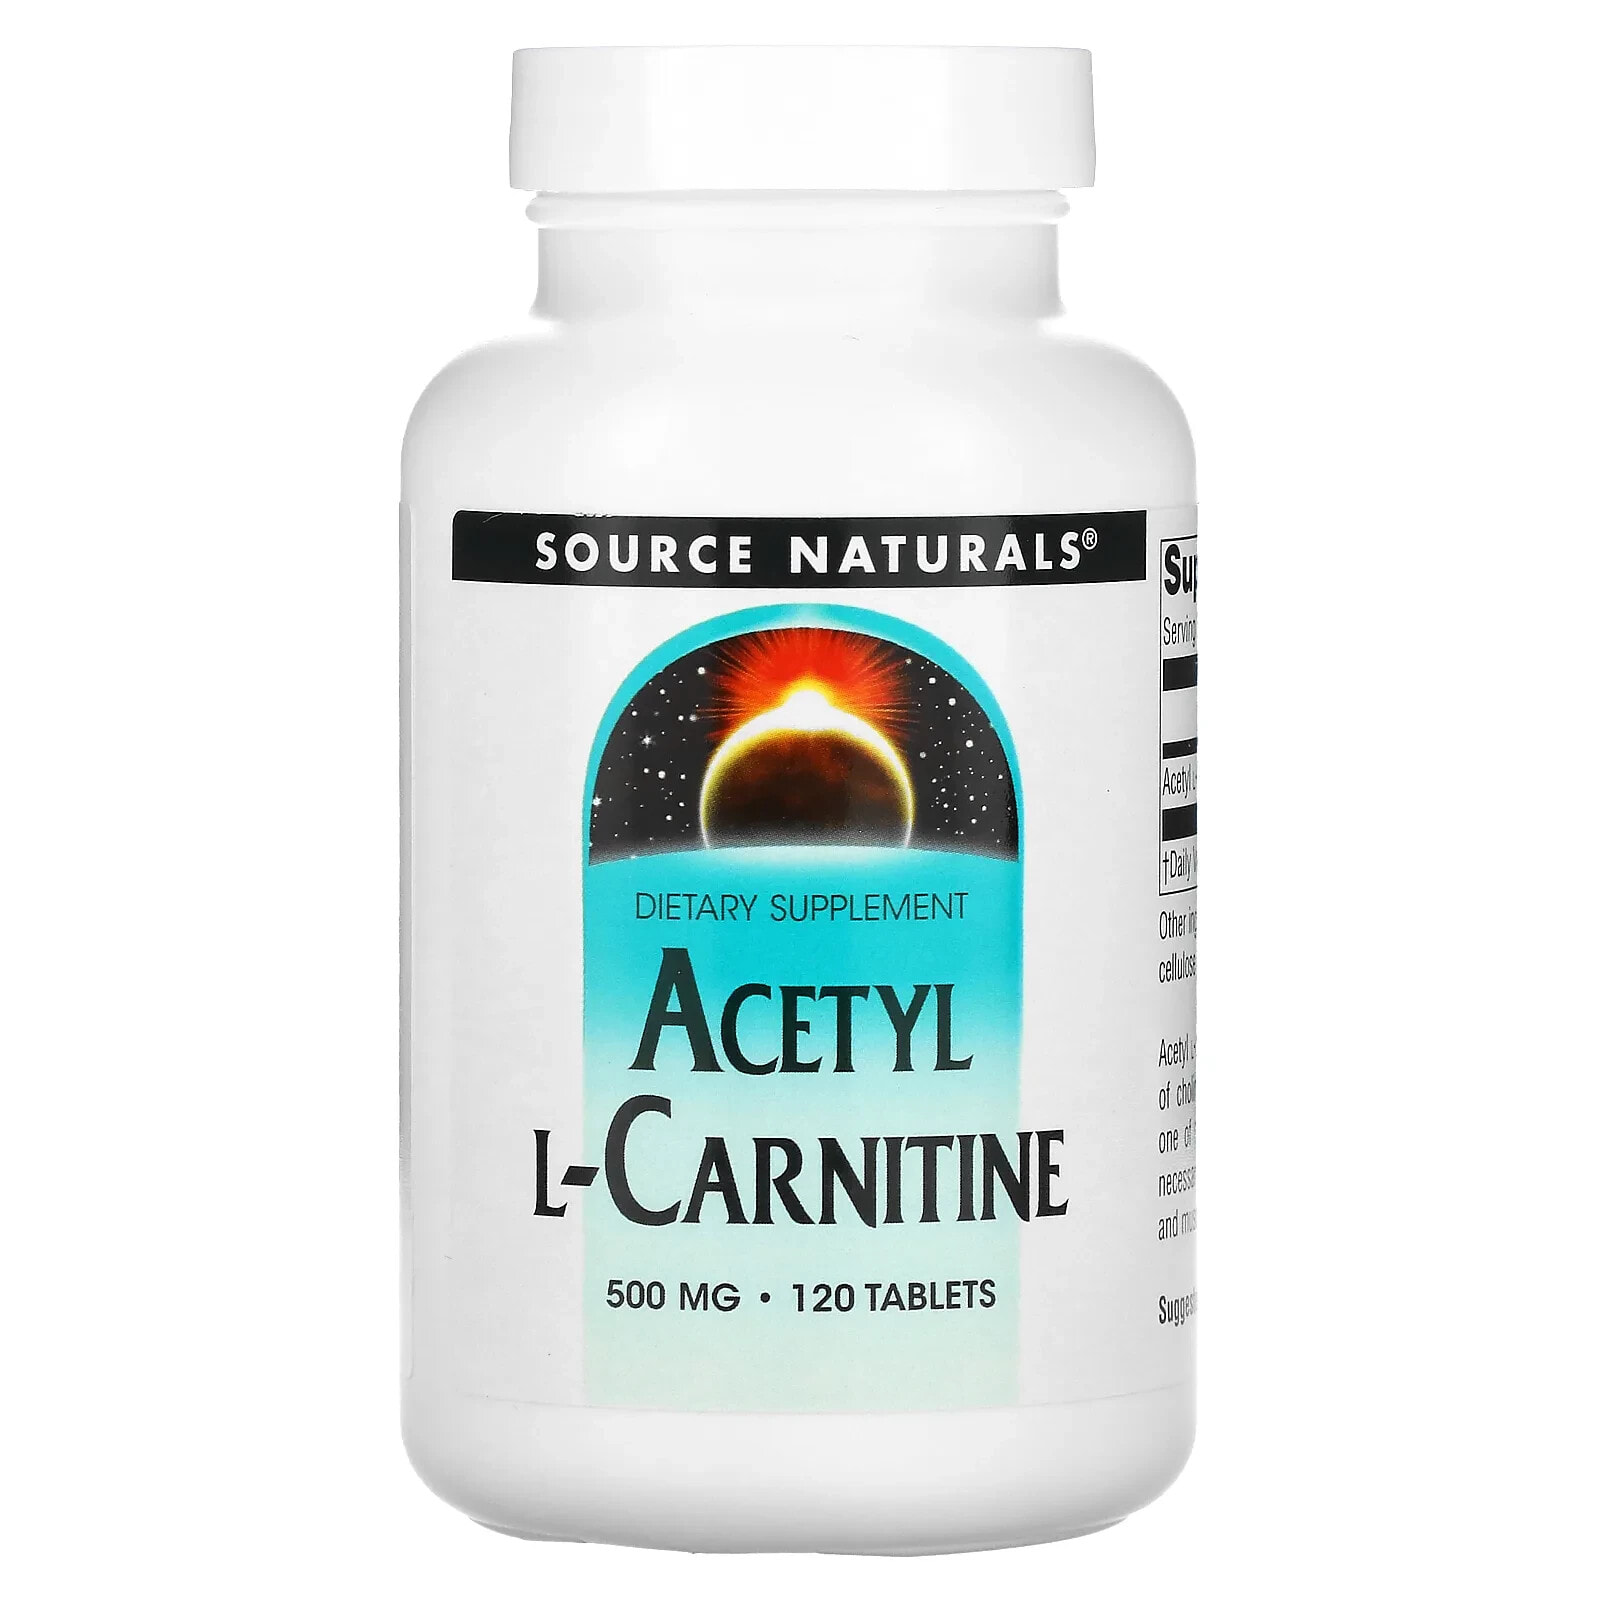 Source Naturals, Acetyl L-Carnitine, 500 mg, 60 Tablets